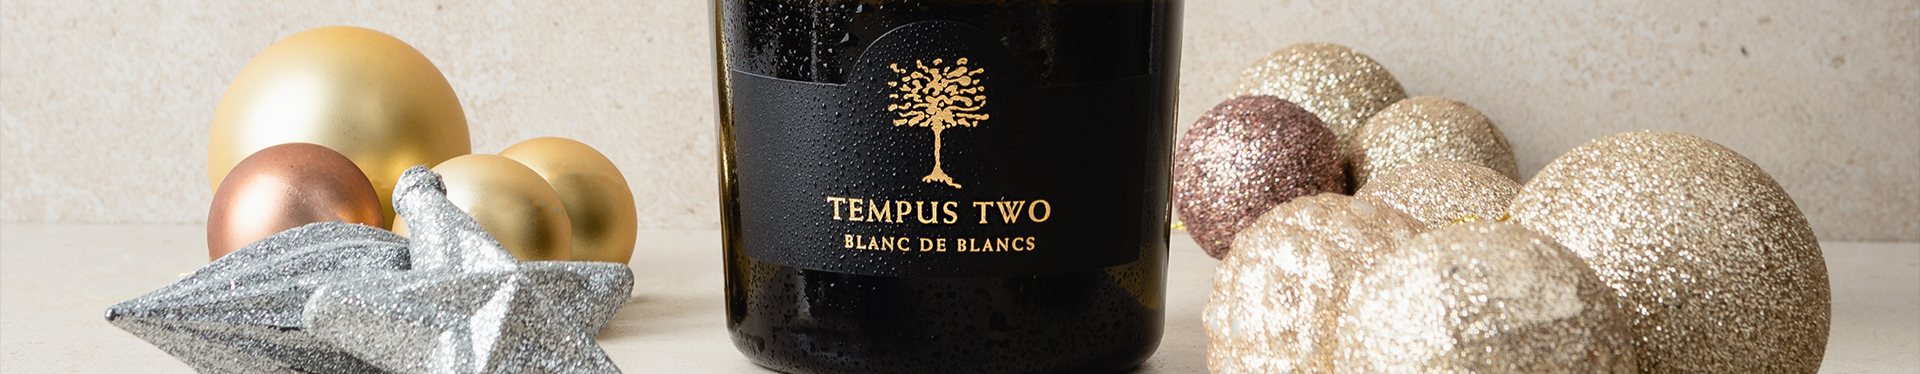 Bottle of Tempus Two Blanc De Blancs with various Christmas decorations